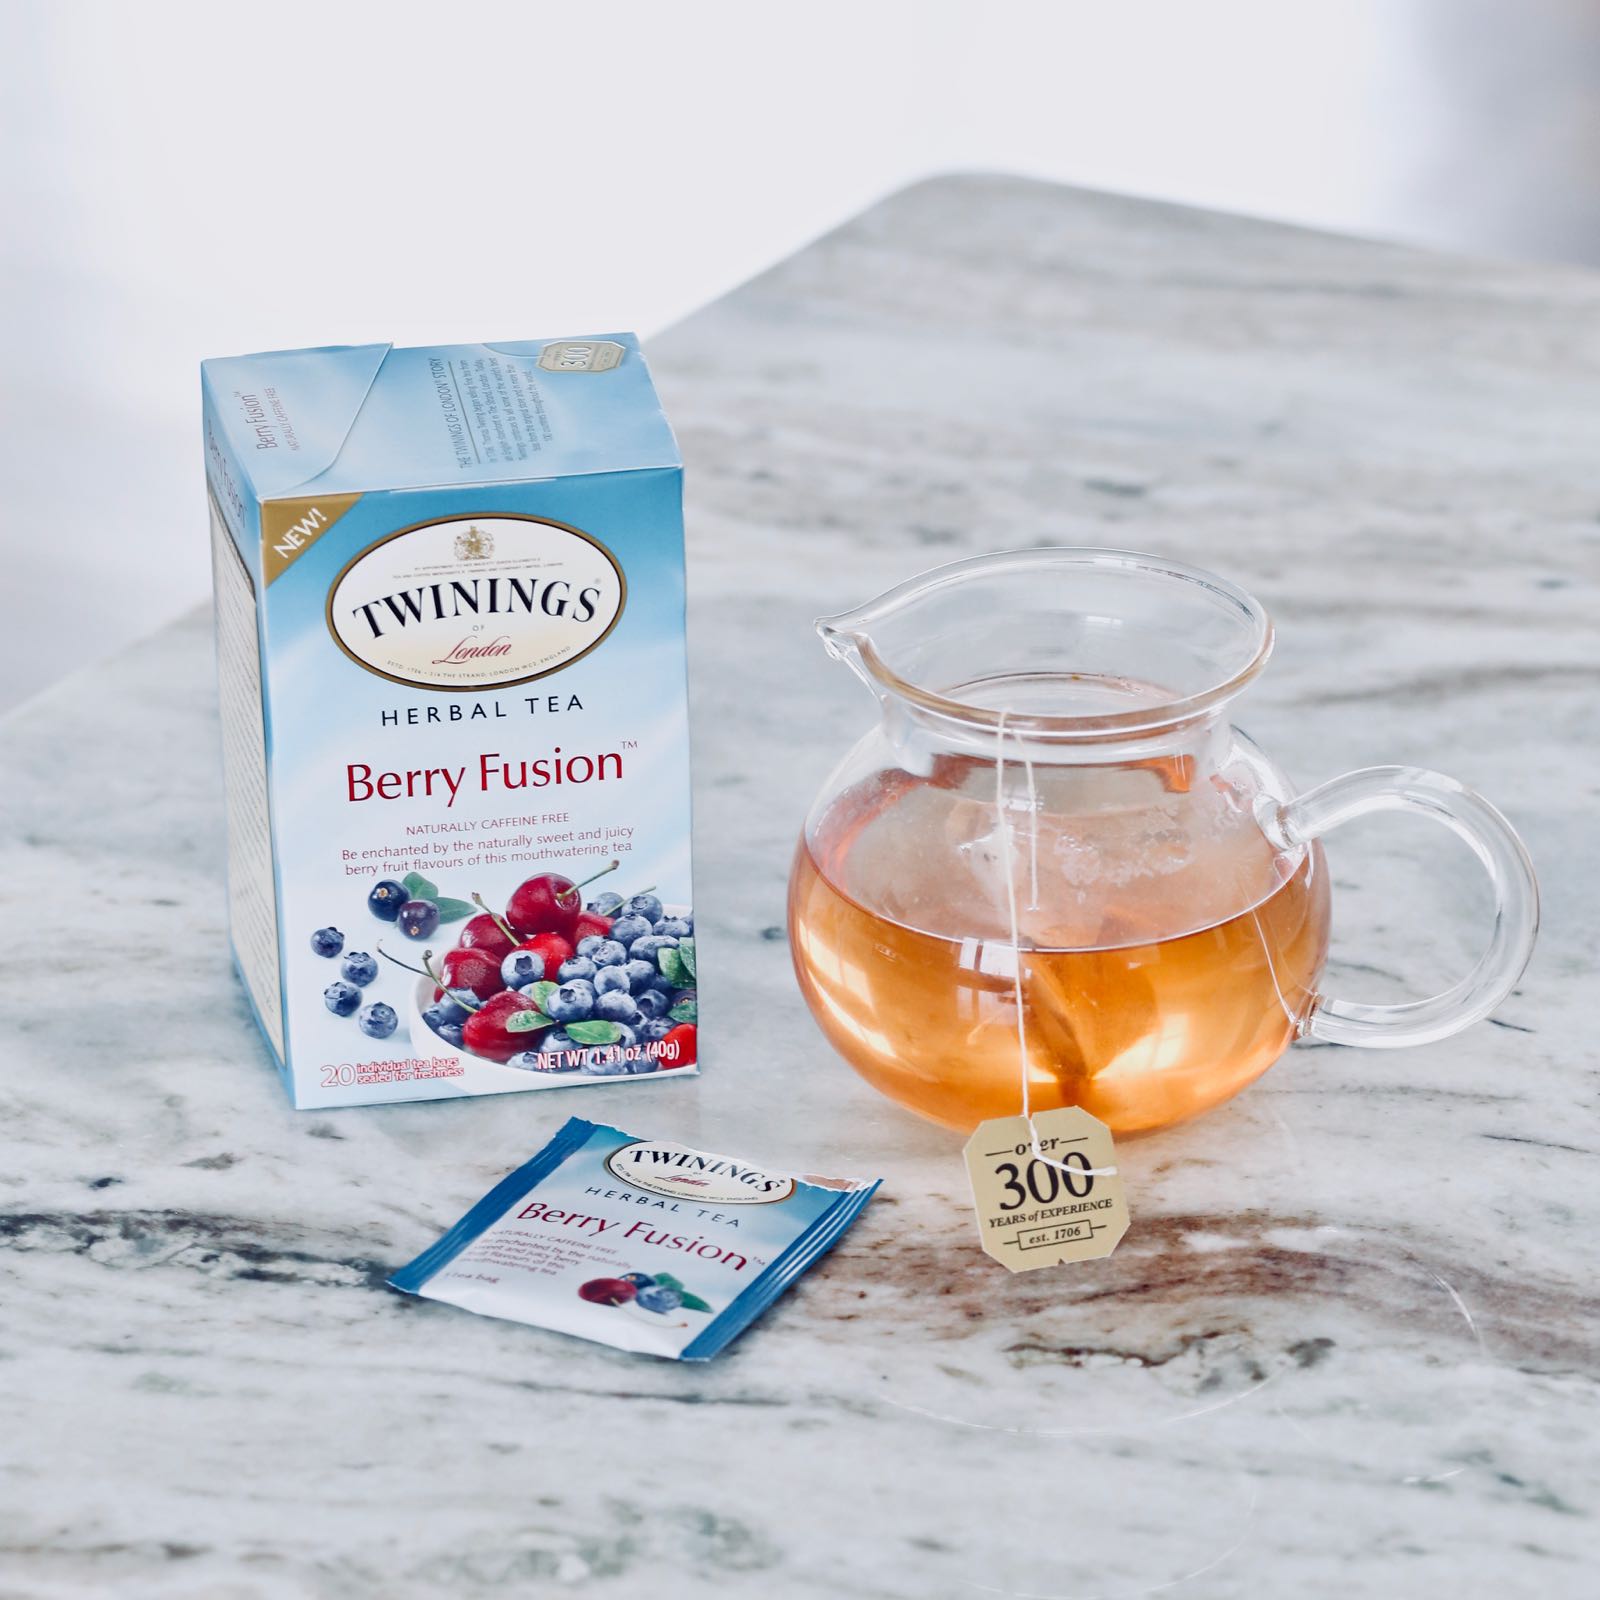 #ad Relax and recharge with Twinings of London latest herbal tea blends: Lemon Delight, Berry Fusion and Buttermint! #BeYourBestBlend